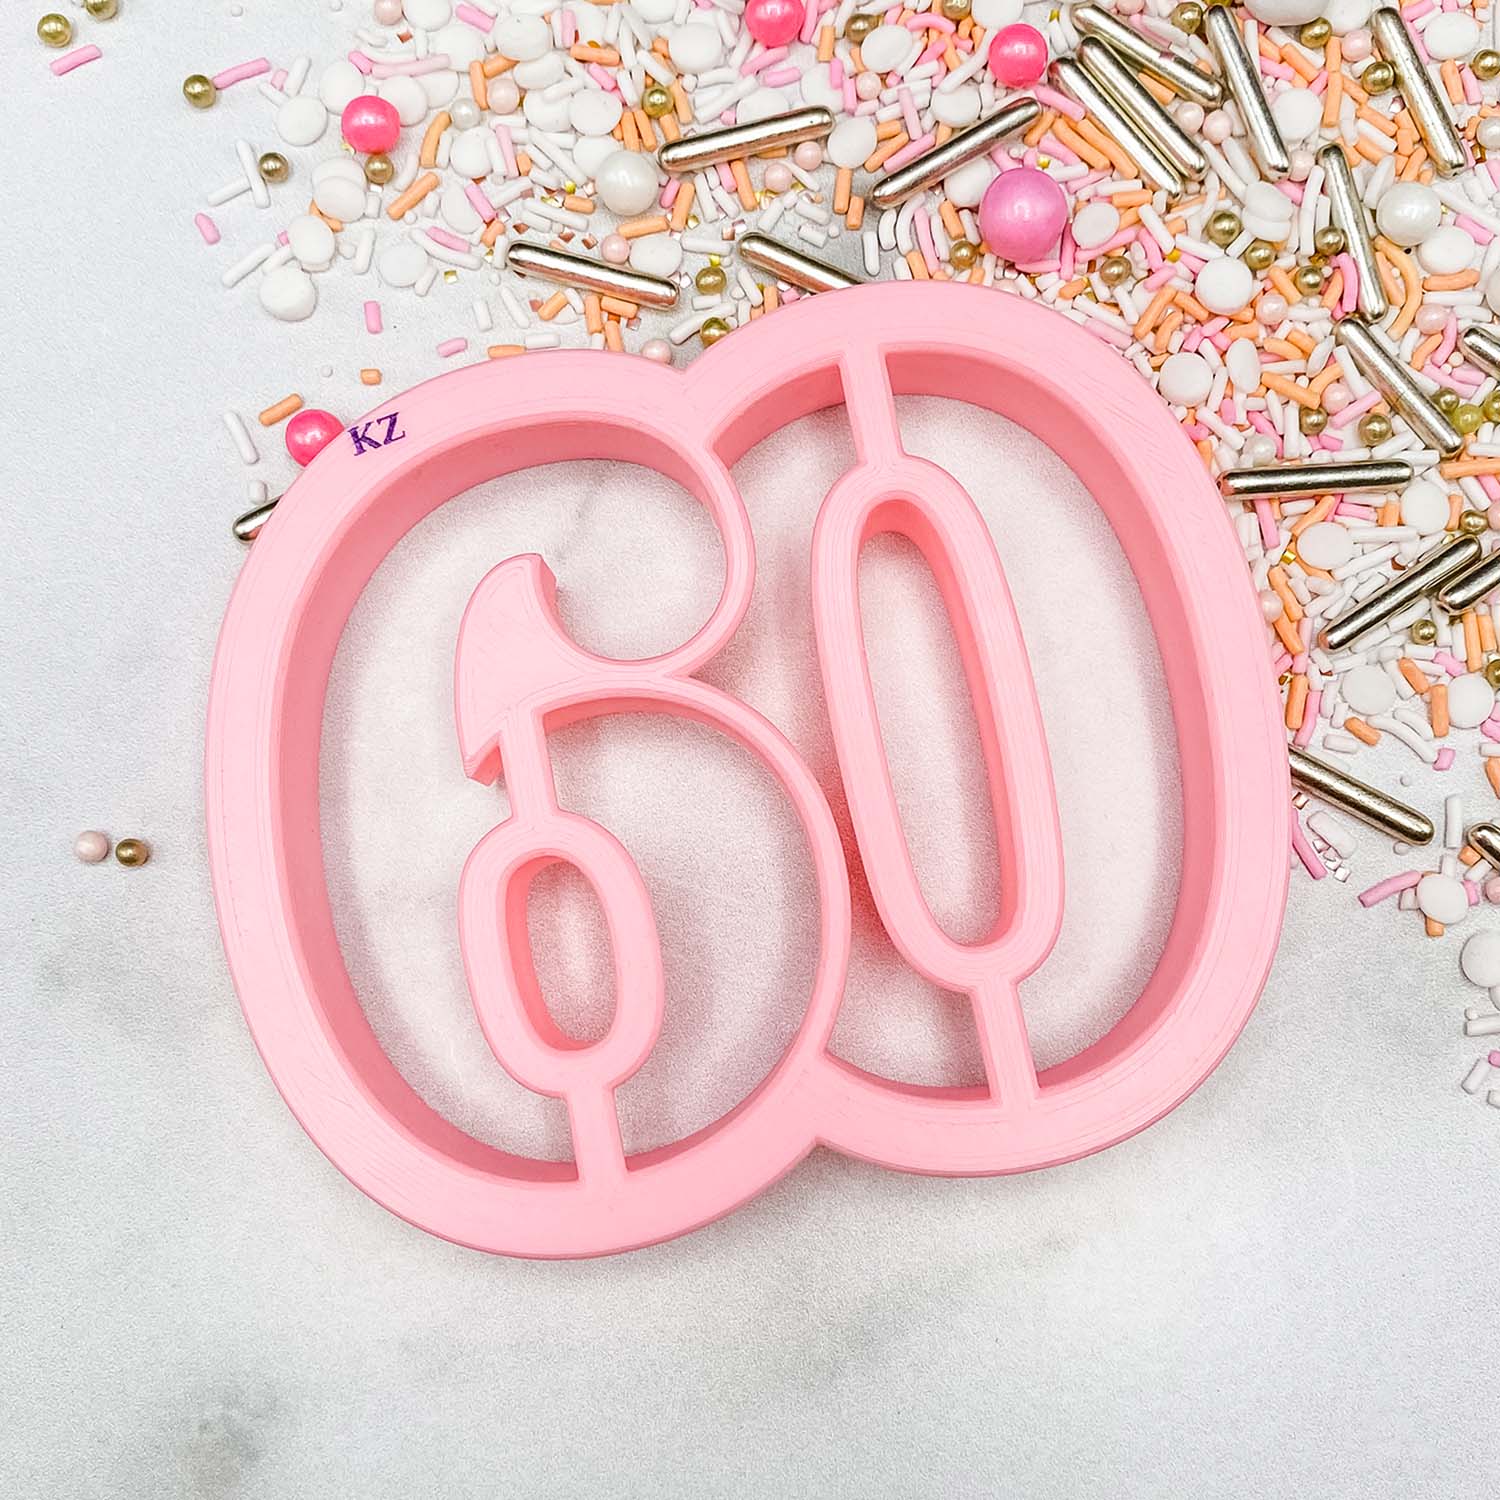 cookie cutter in the shape of the number 60